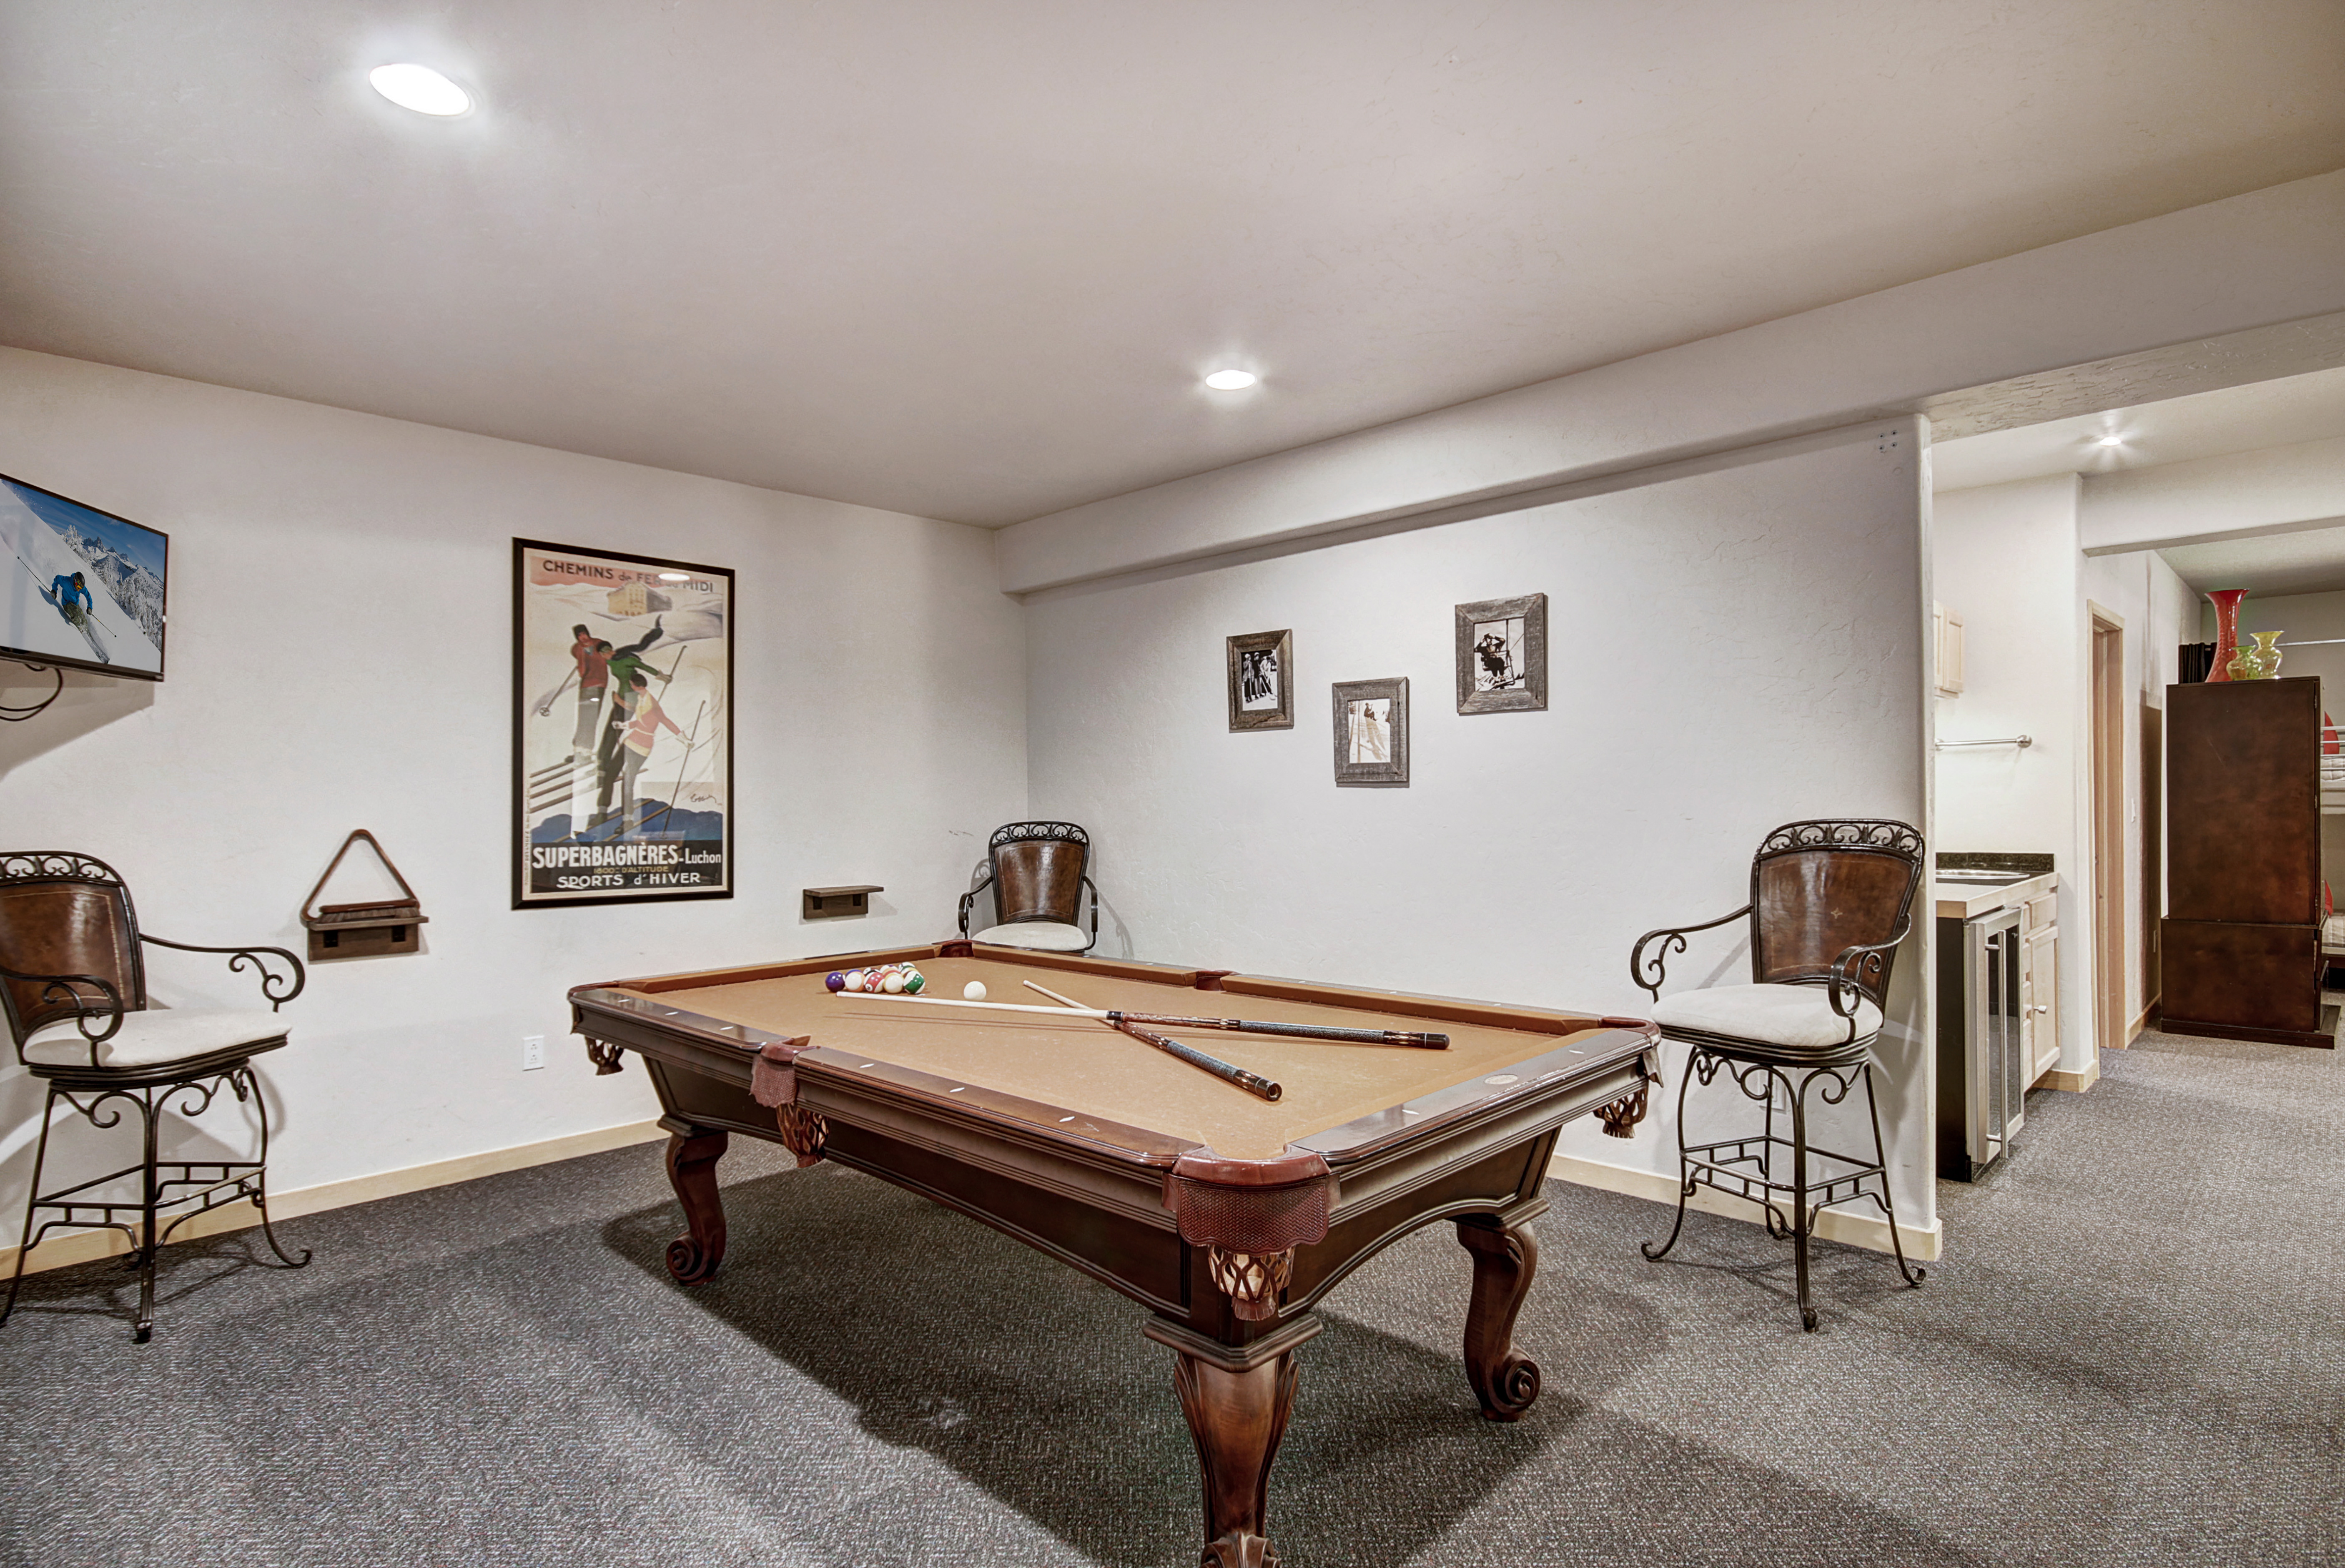 Pool table located in the lower level recreation room. - Buffalo Mountain Vista Frisco Vacation Rental